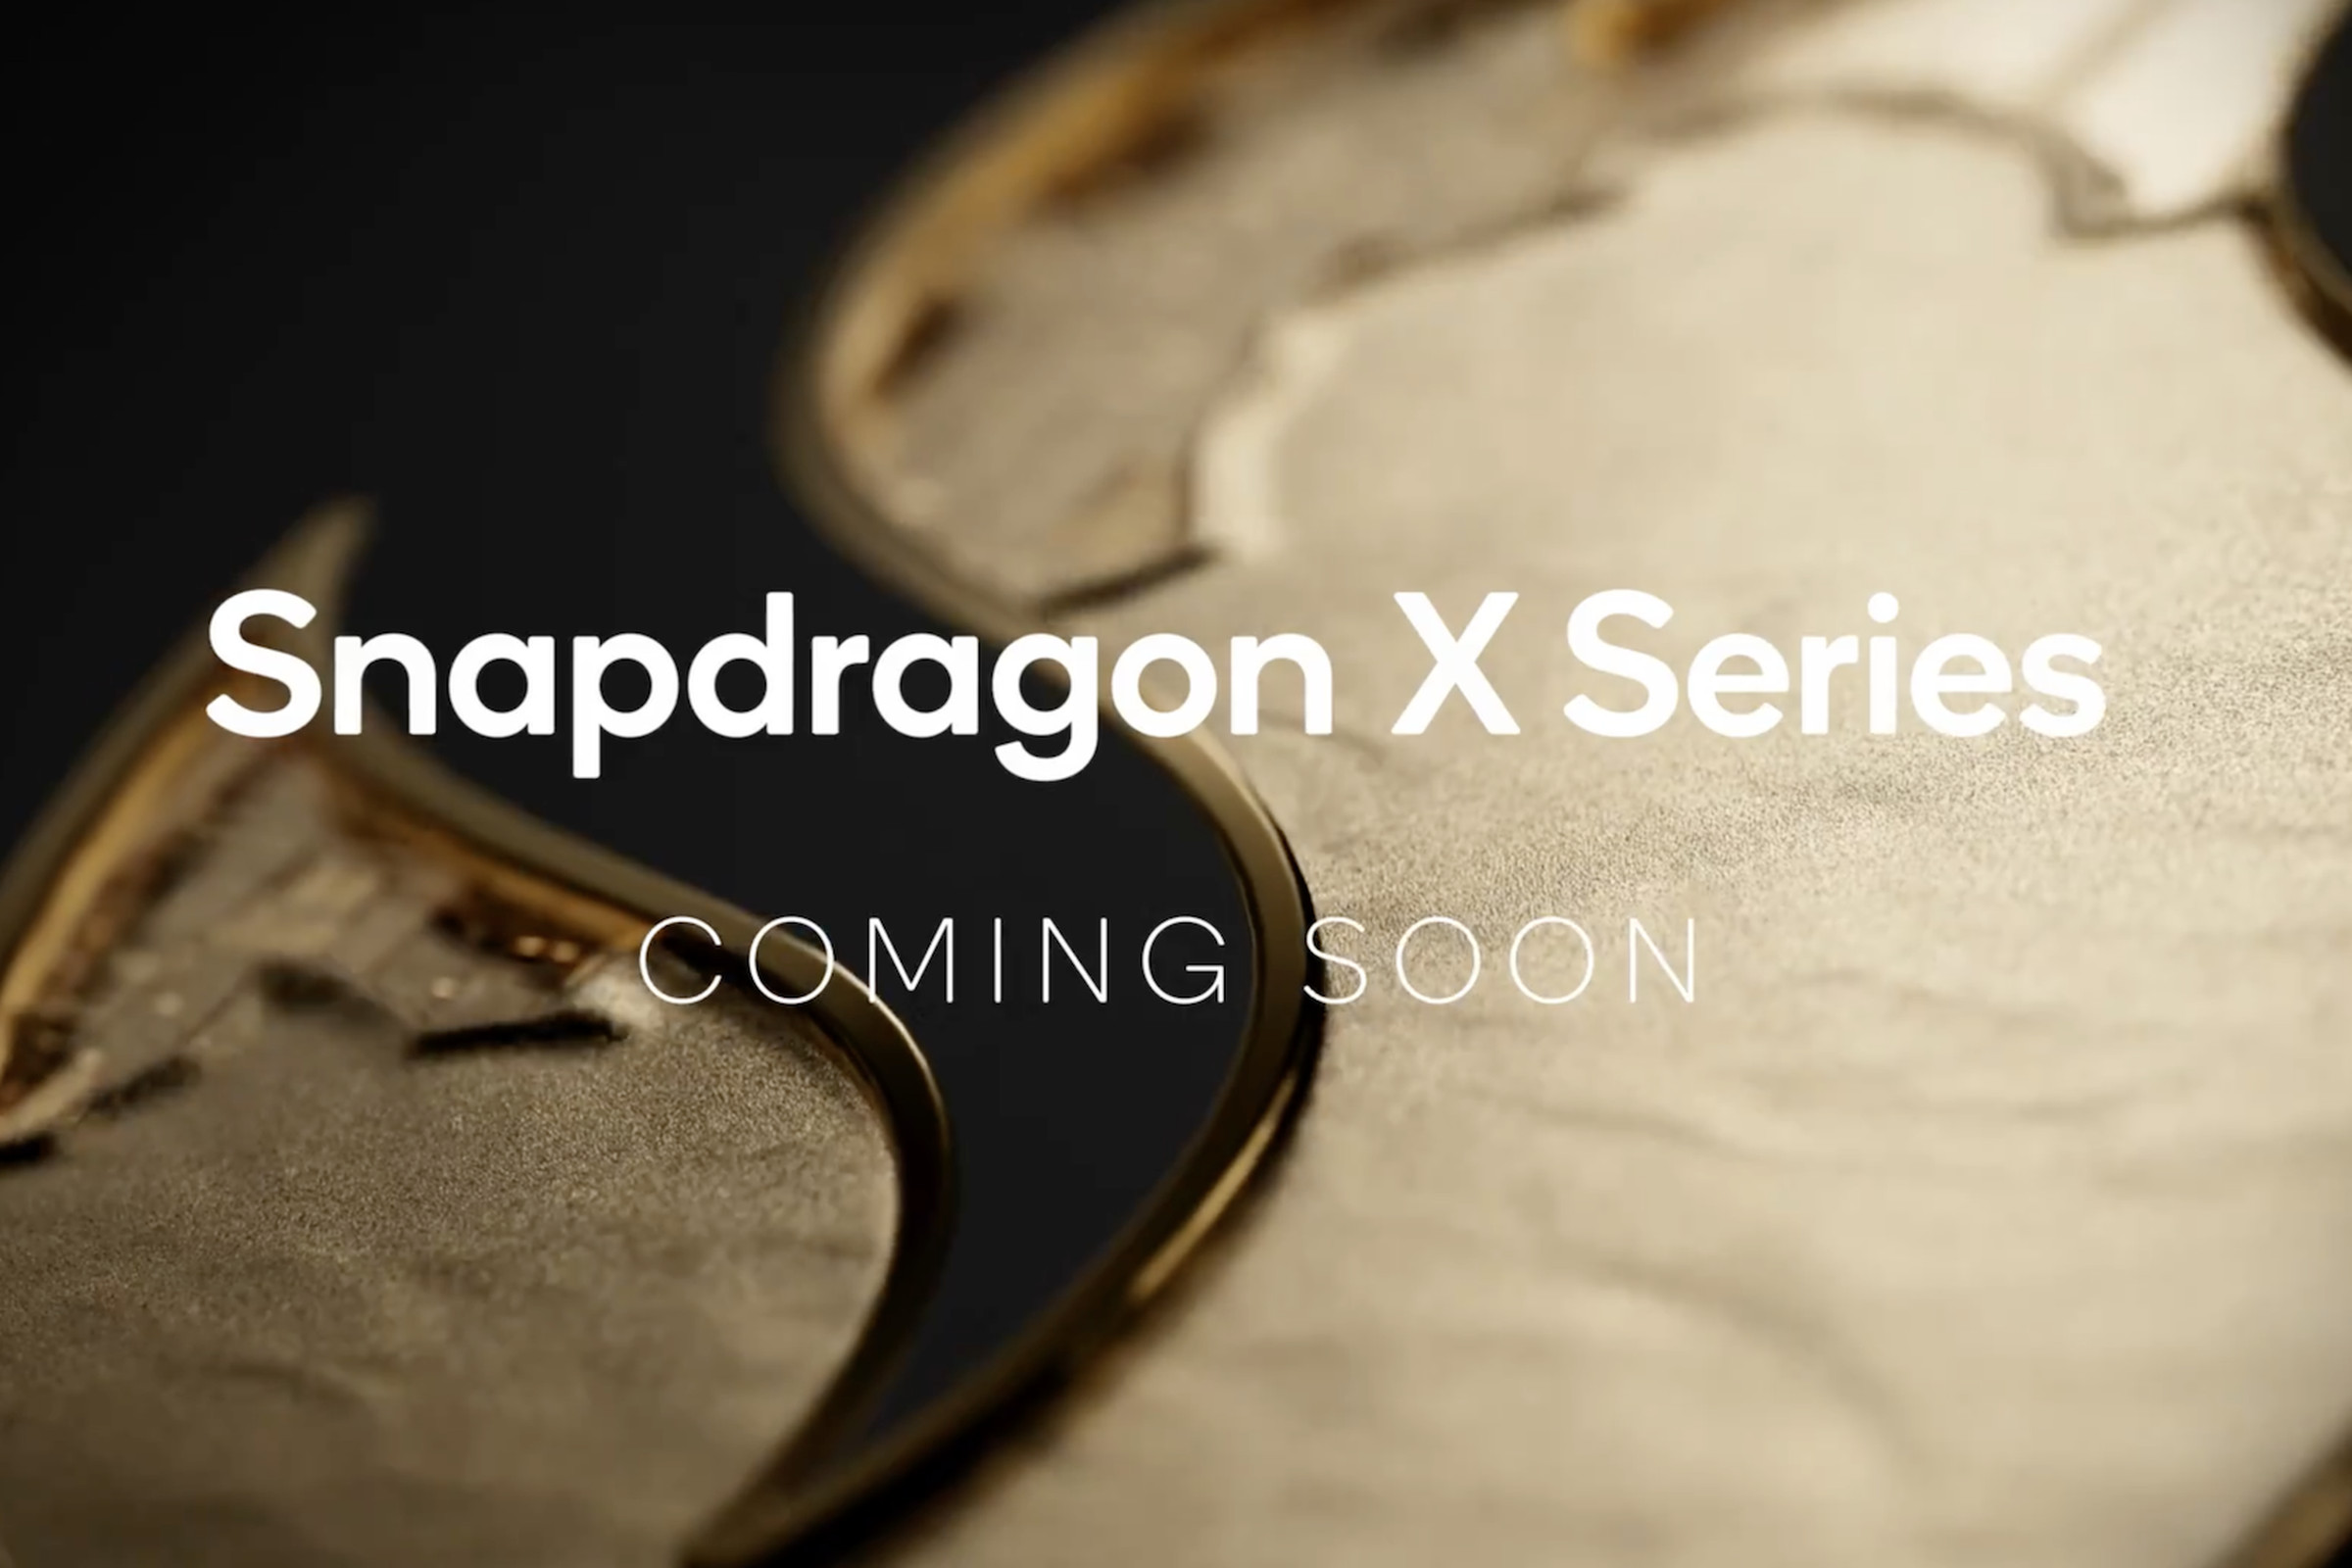 An image of the words “Snapdragon X Series” and “coming soon.”